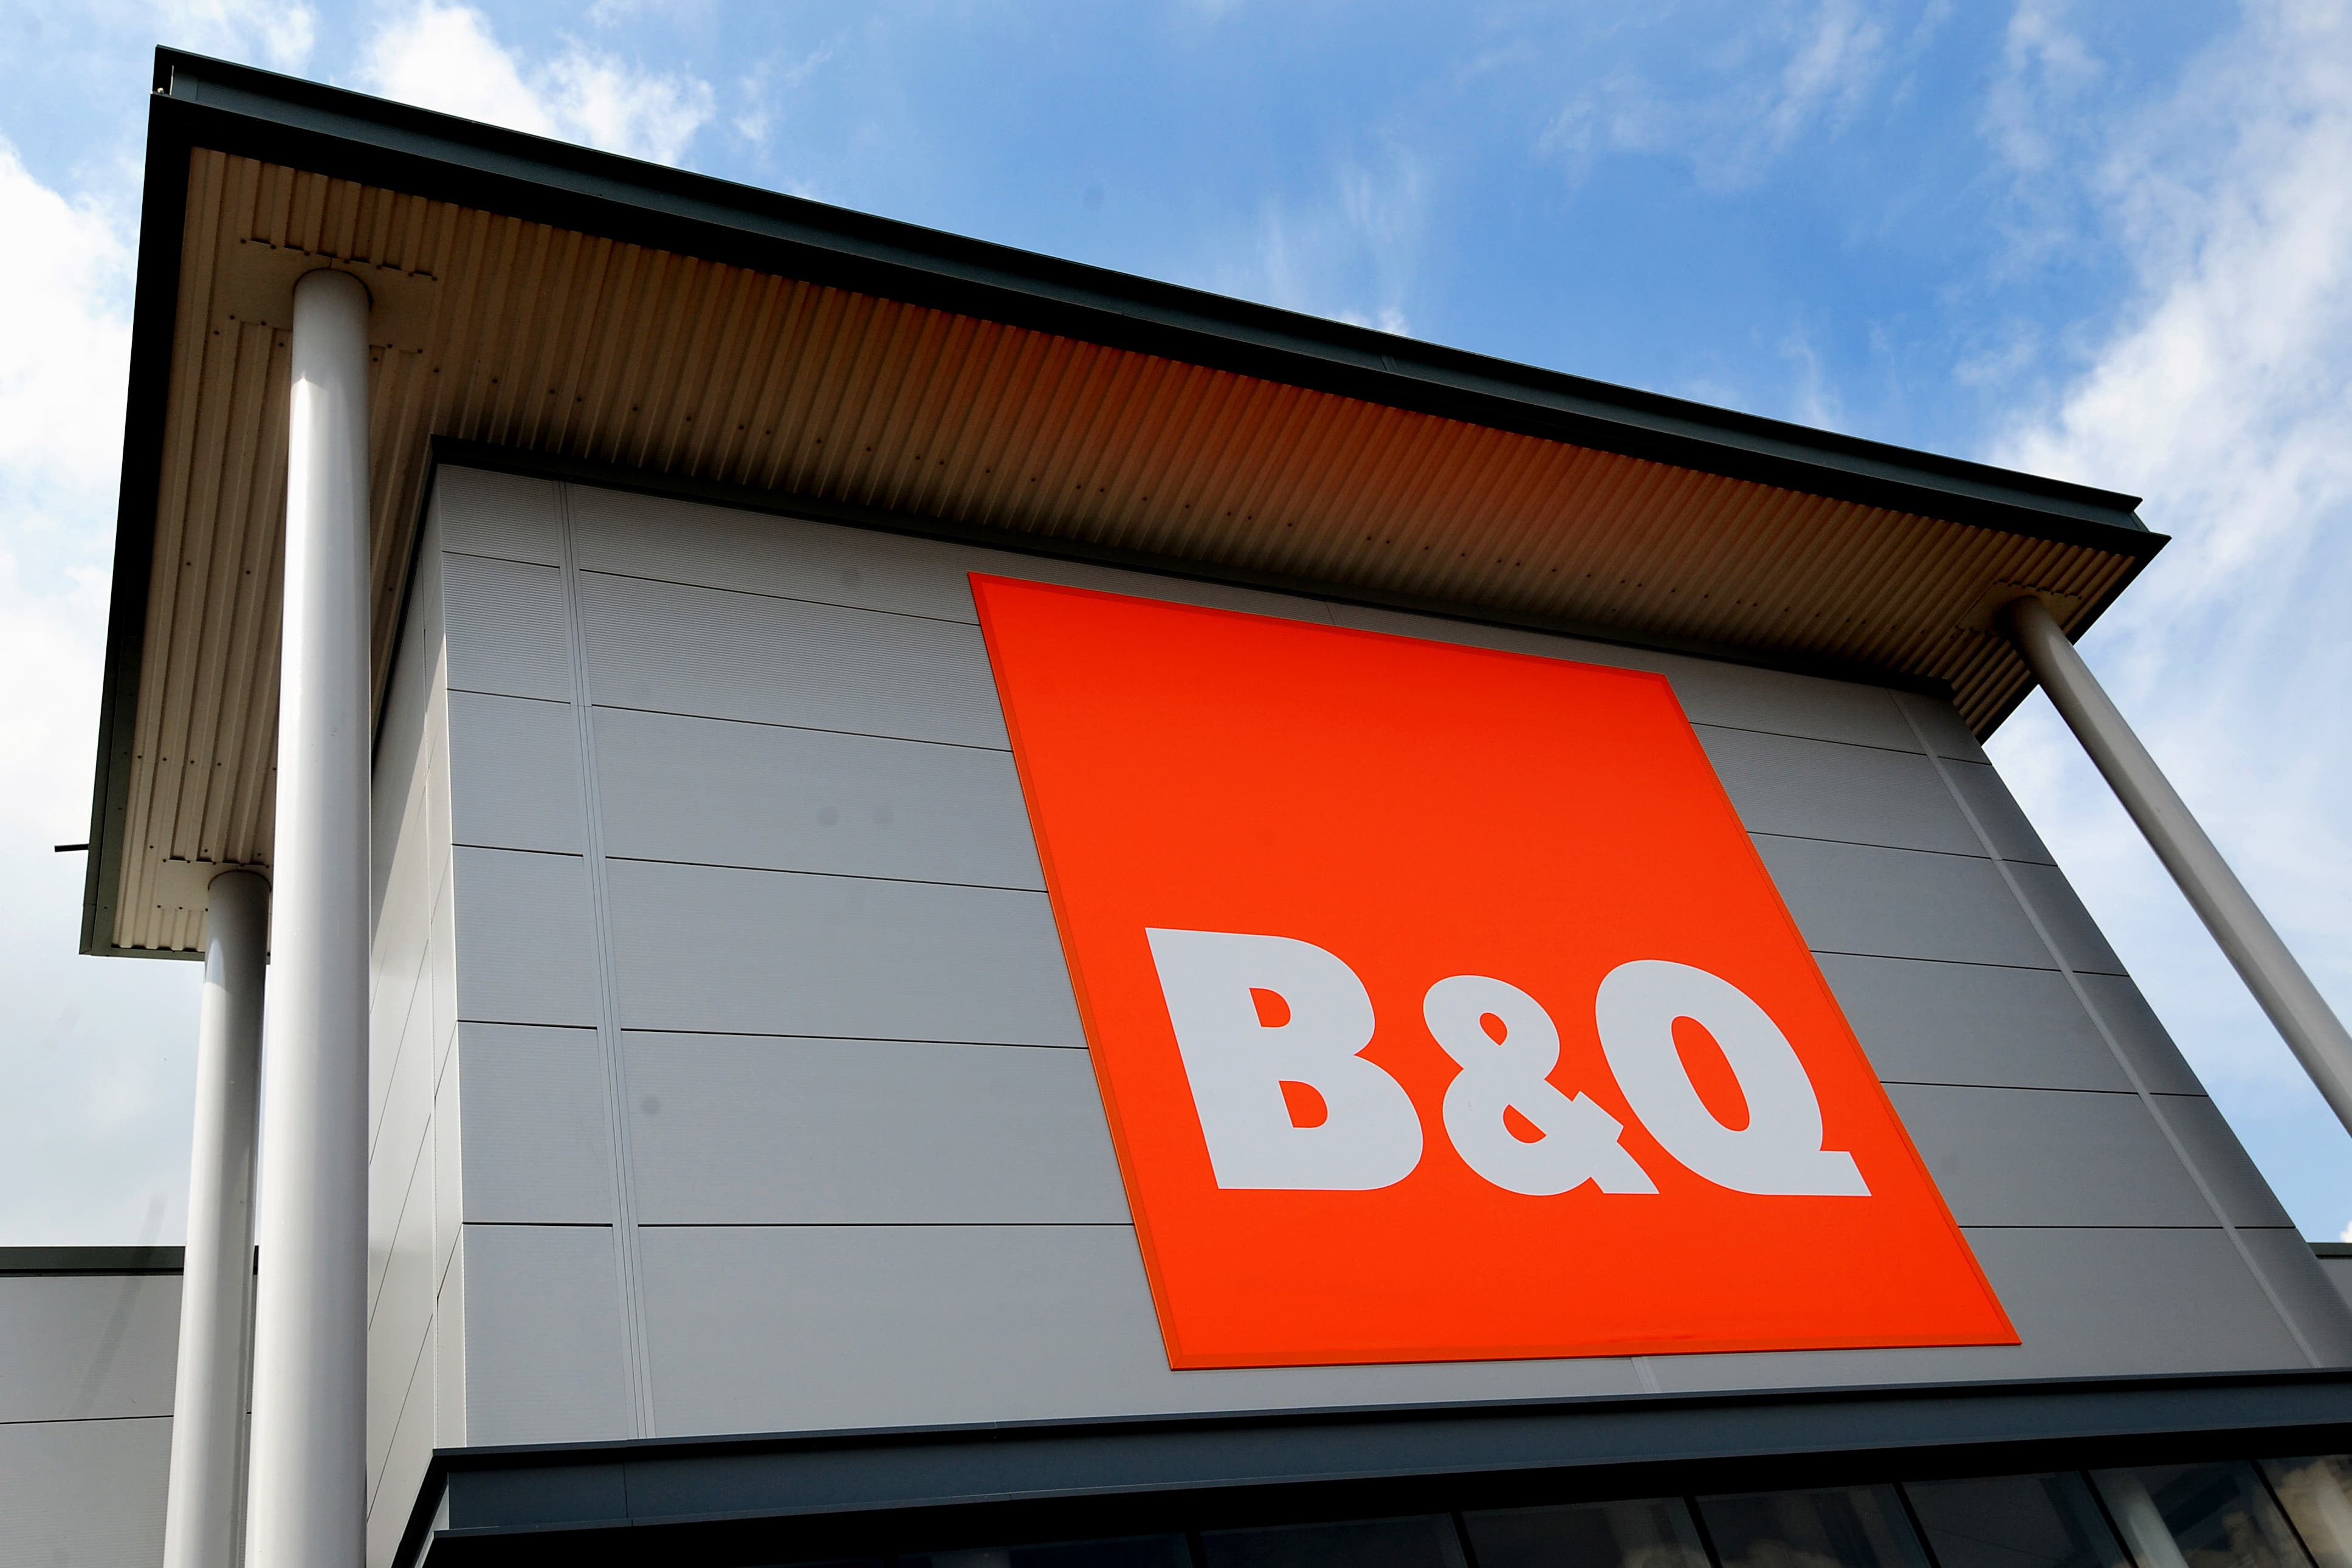 B&Q owner Kingfisher has revealed annual profits slumped by more than a quarter and warned over another steep fall in earnings this year as it overhauls its French arm to help revive its fortunes (PA)